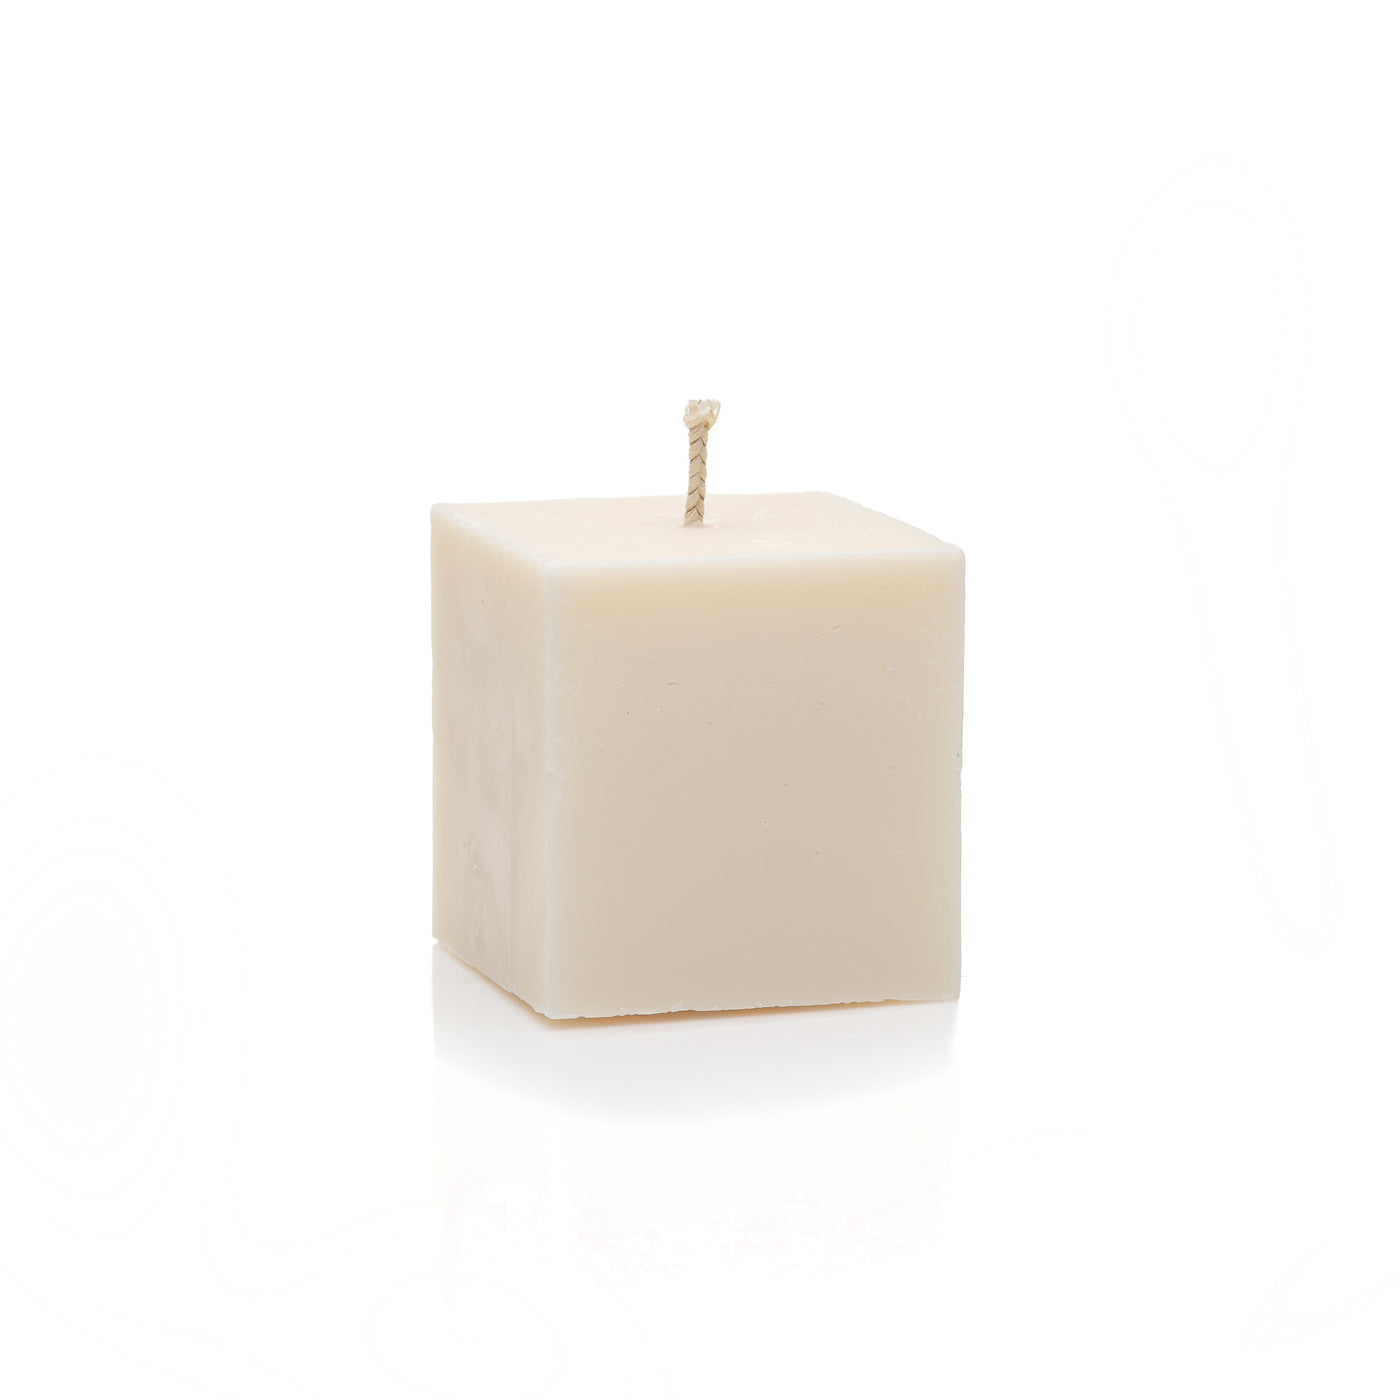 MISS JARDIN "Naked" scented candle